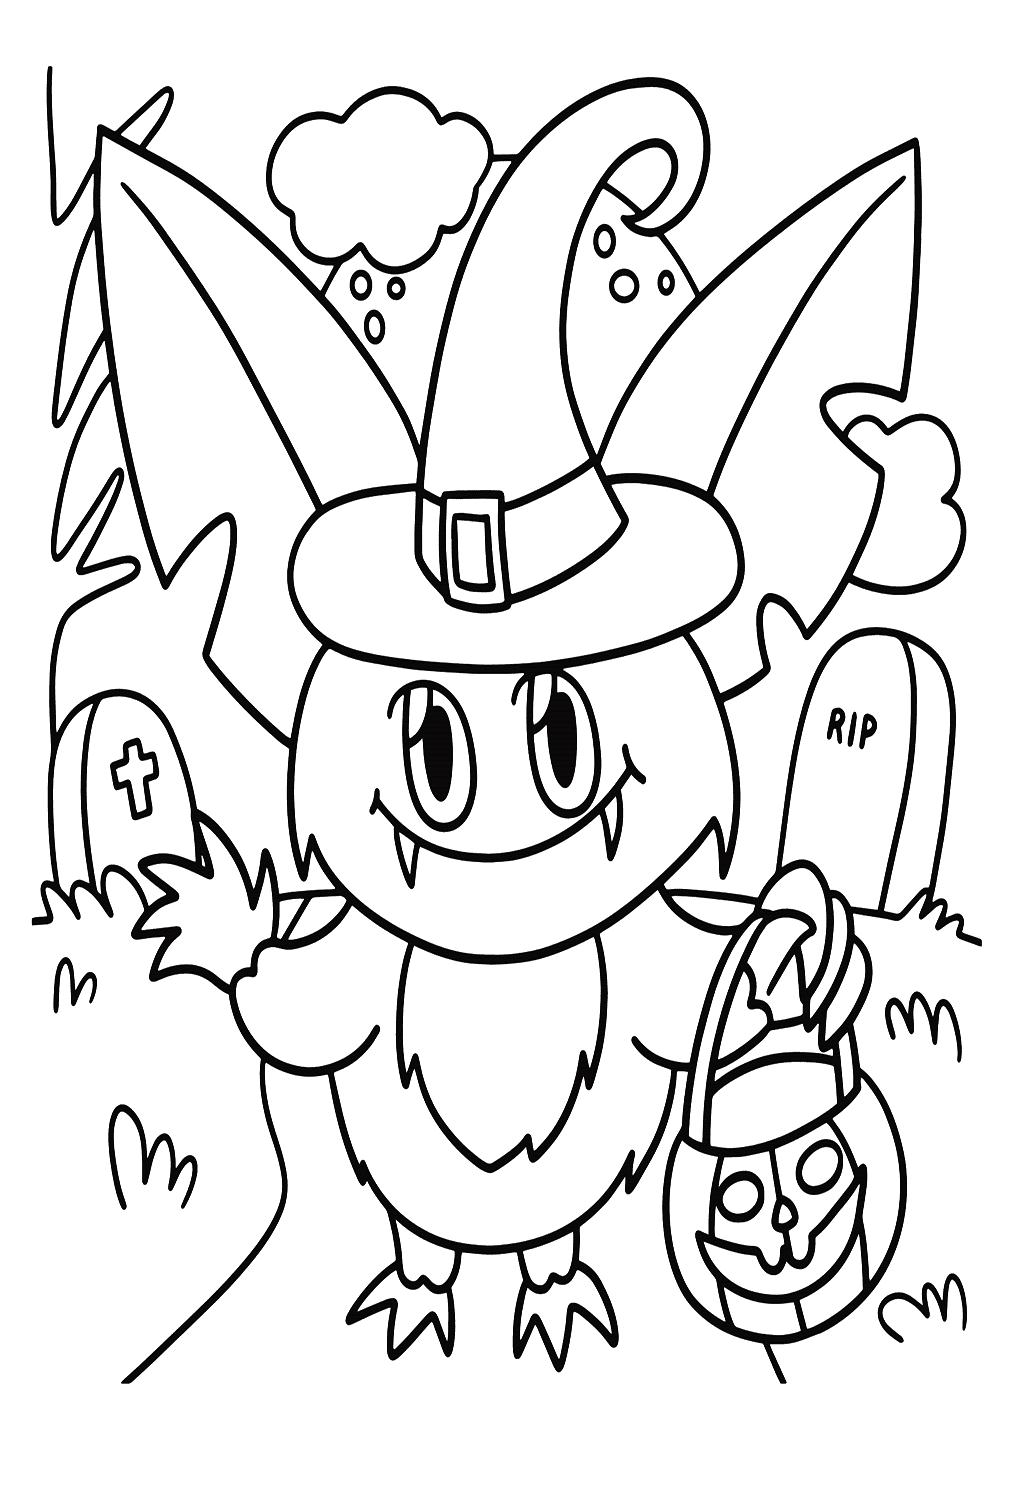 Halloween Vampire Owl Coloring Page